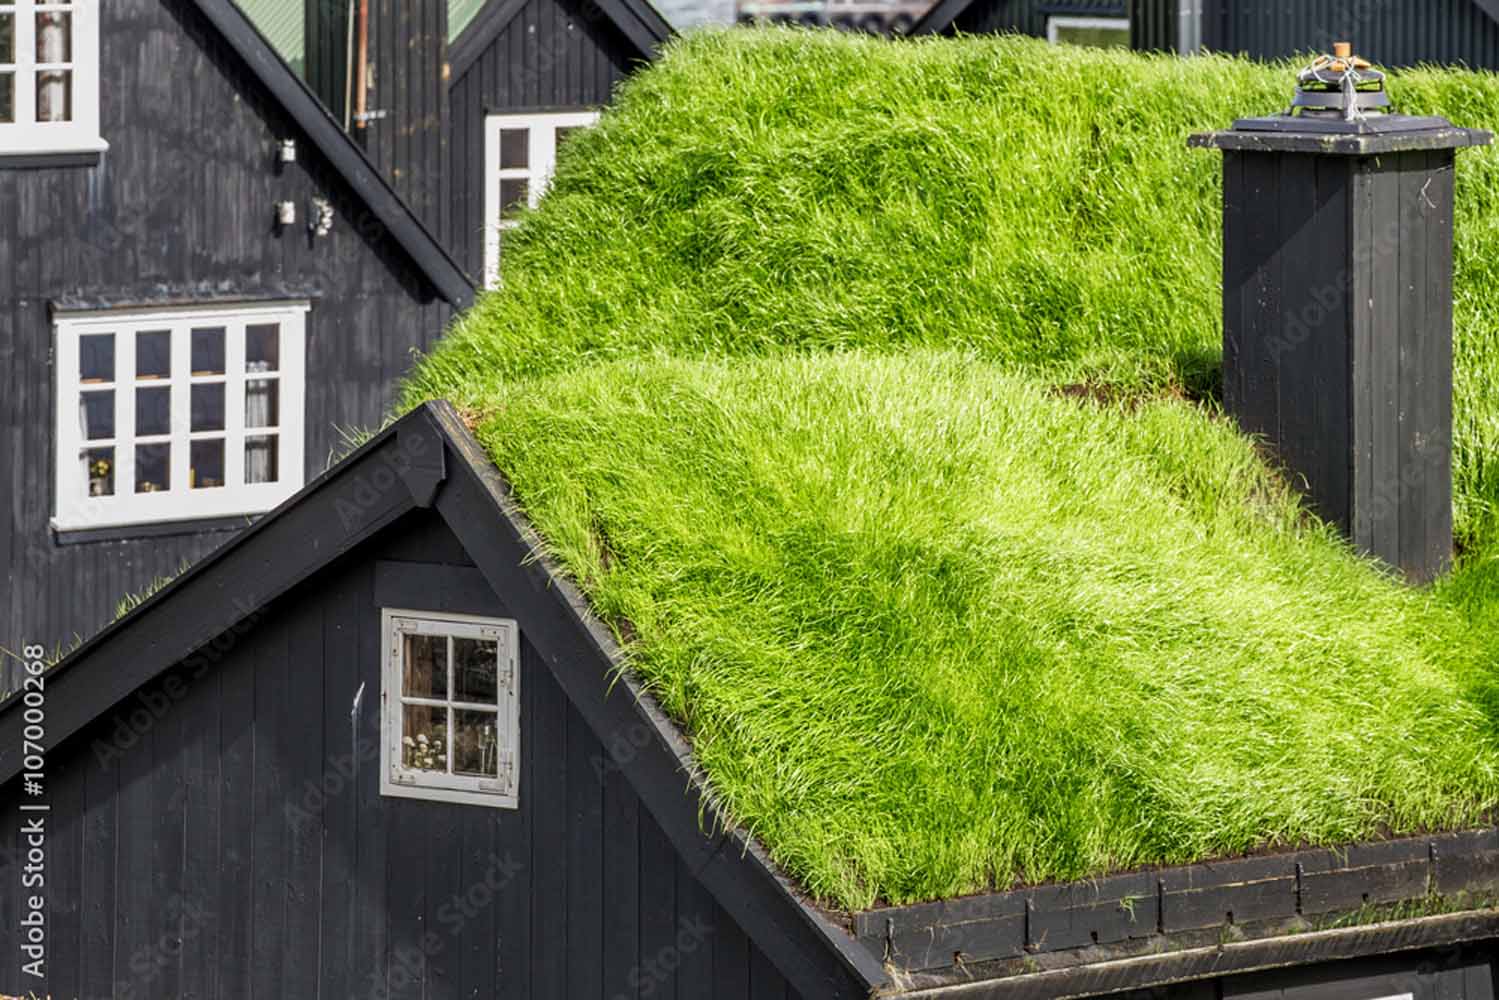 Black wooden house with living roof consisting mainly of grasses